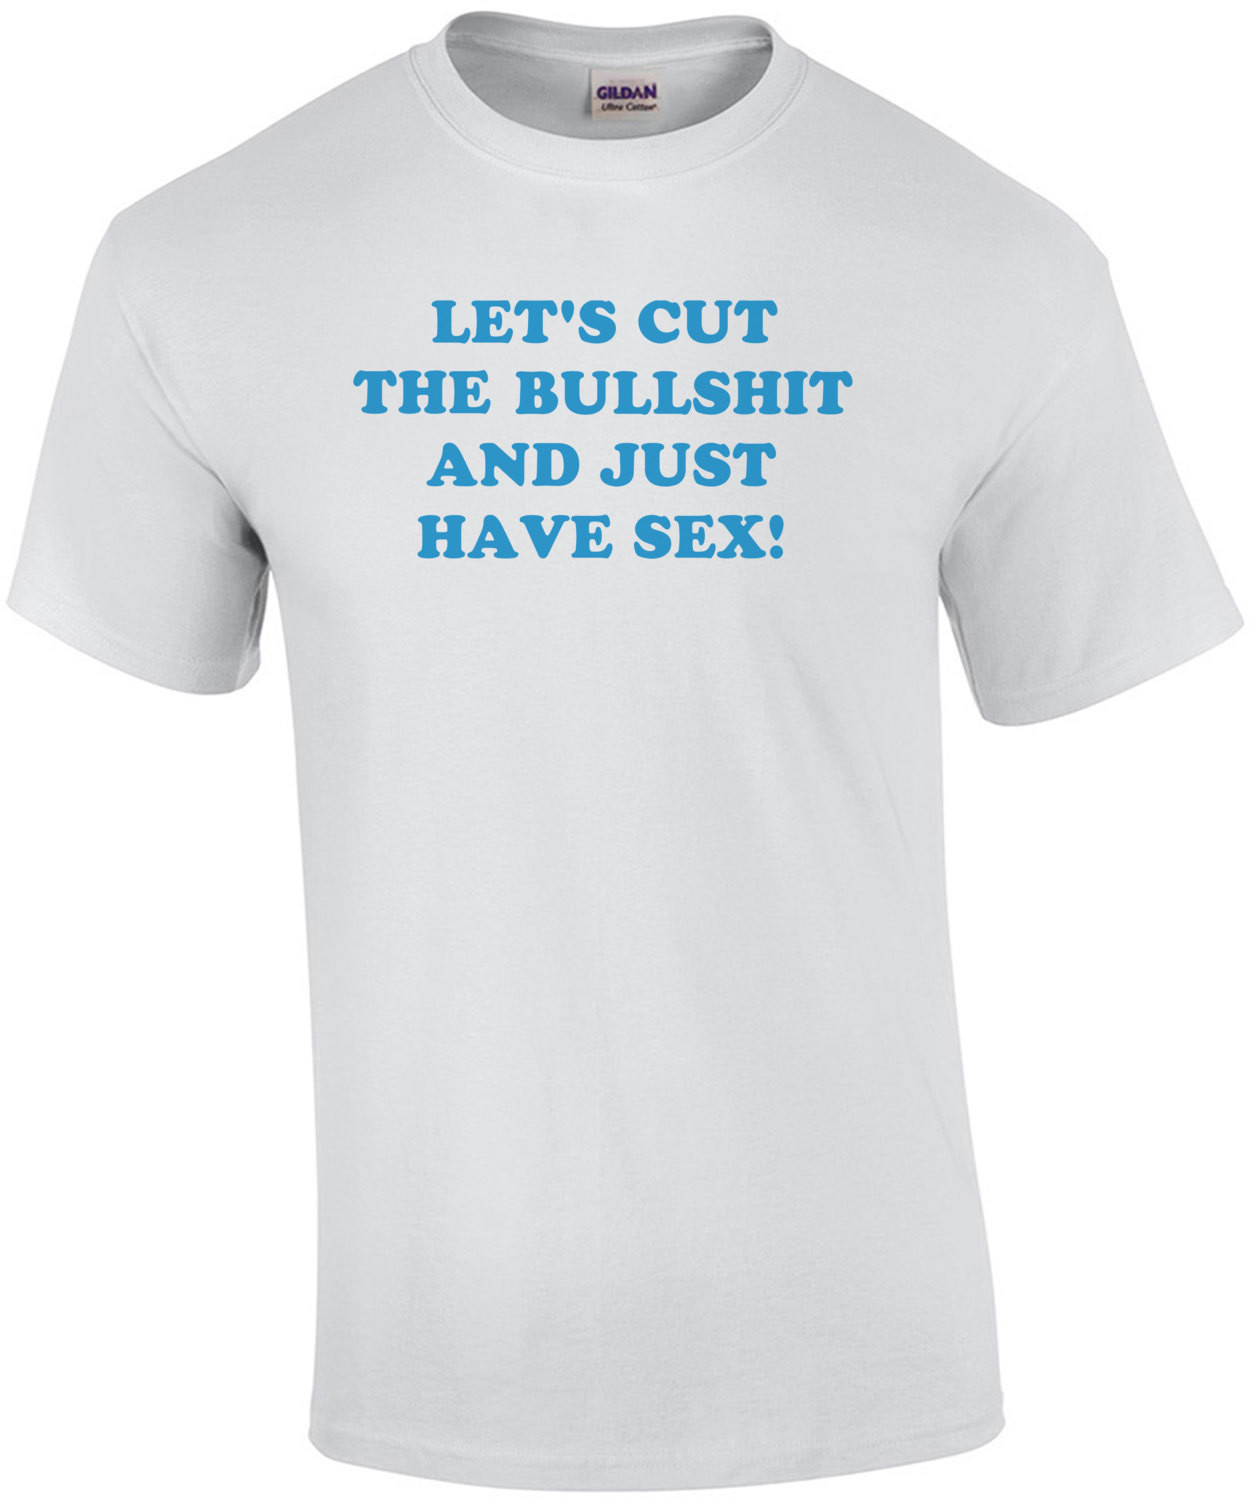 LET'S CUT THE BULLSHIT AND JUST HAVE SEX! Shirt